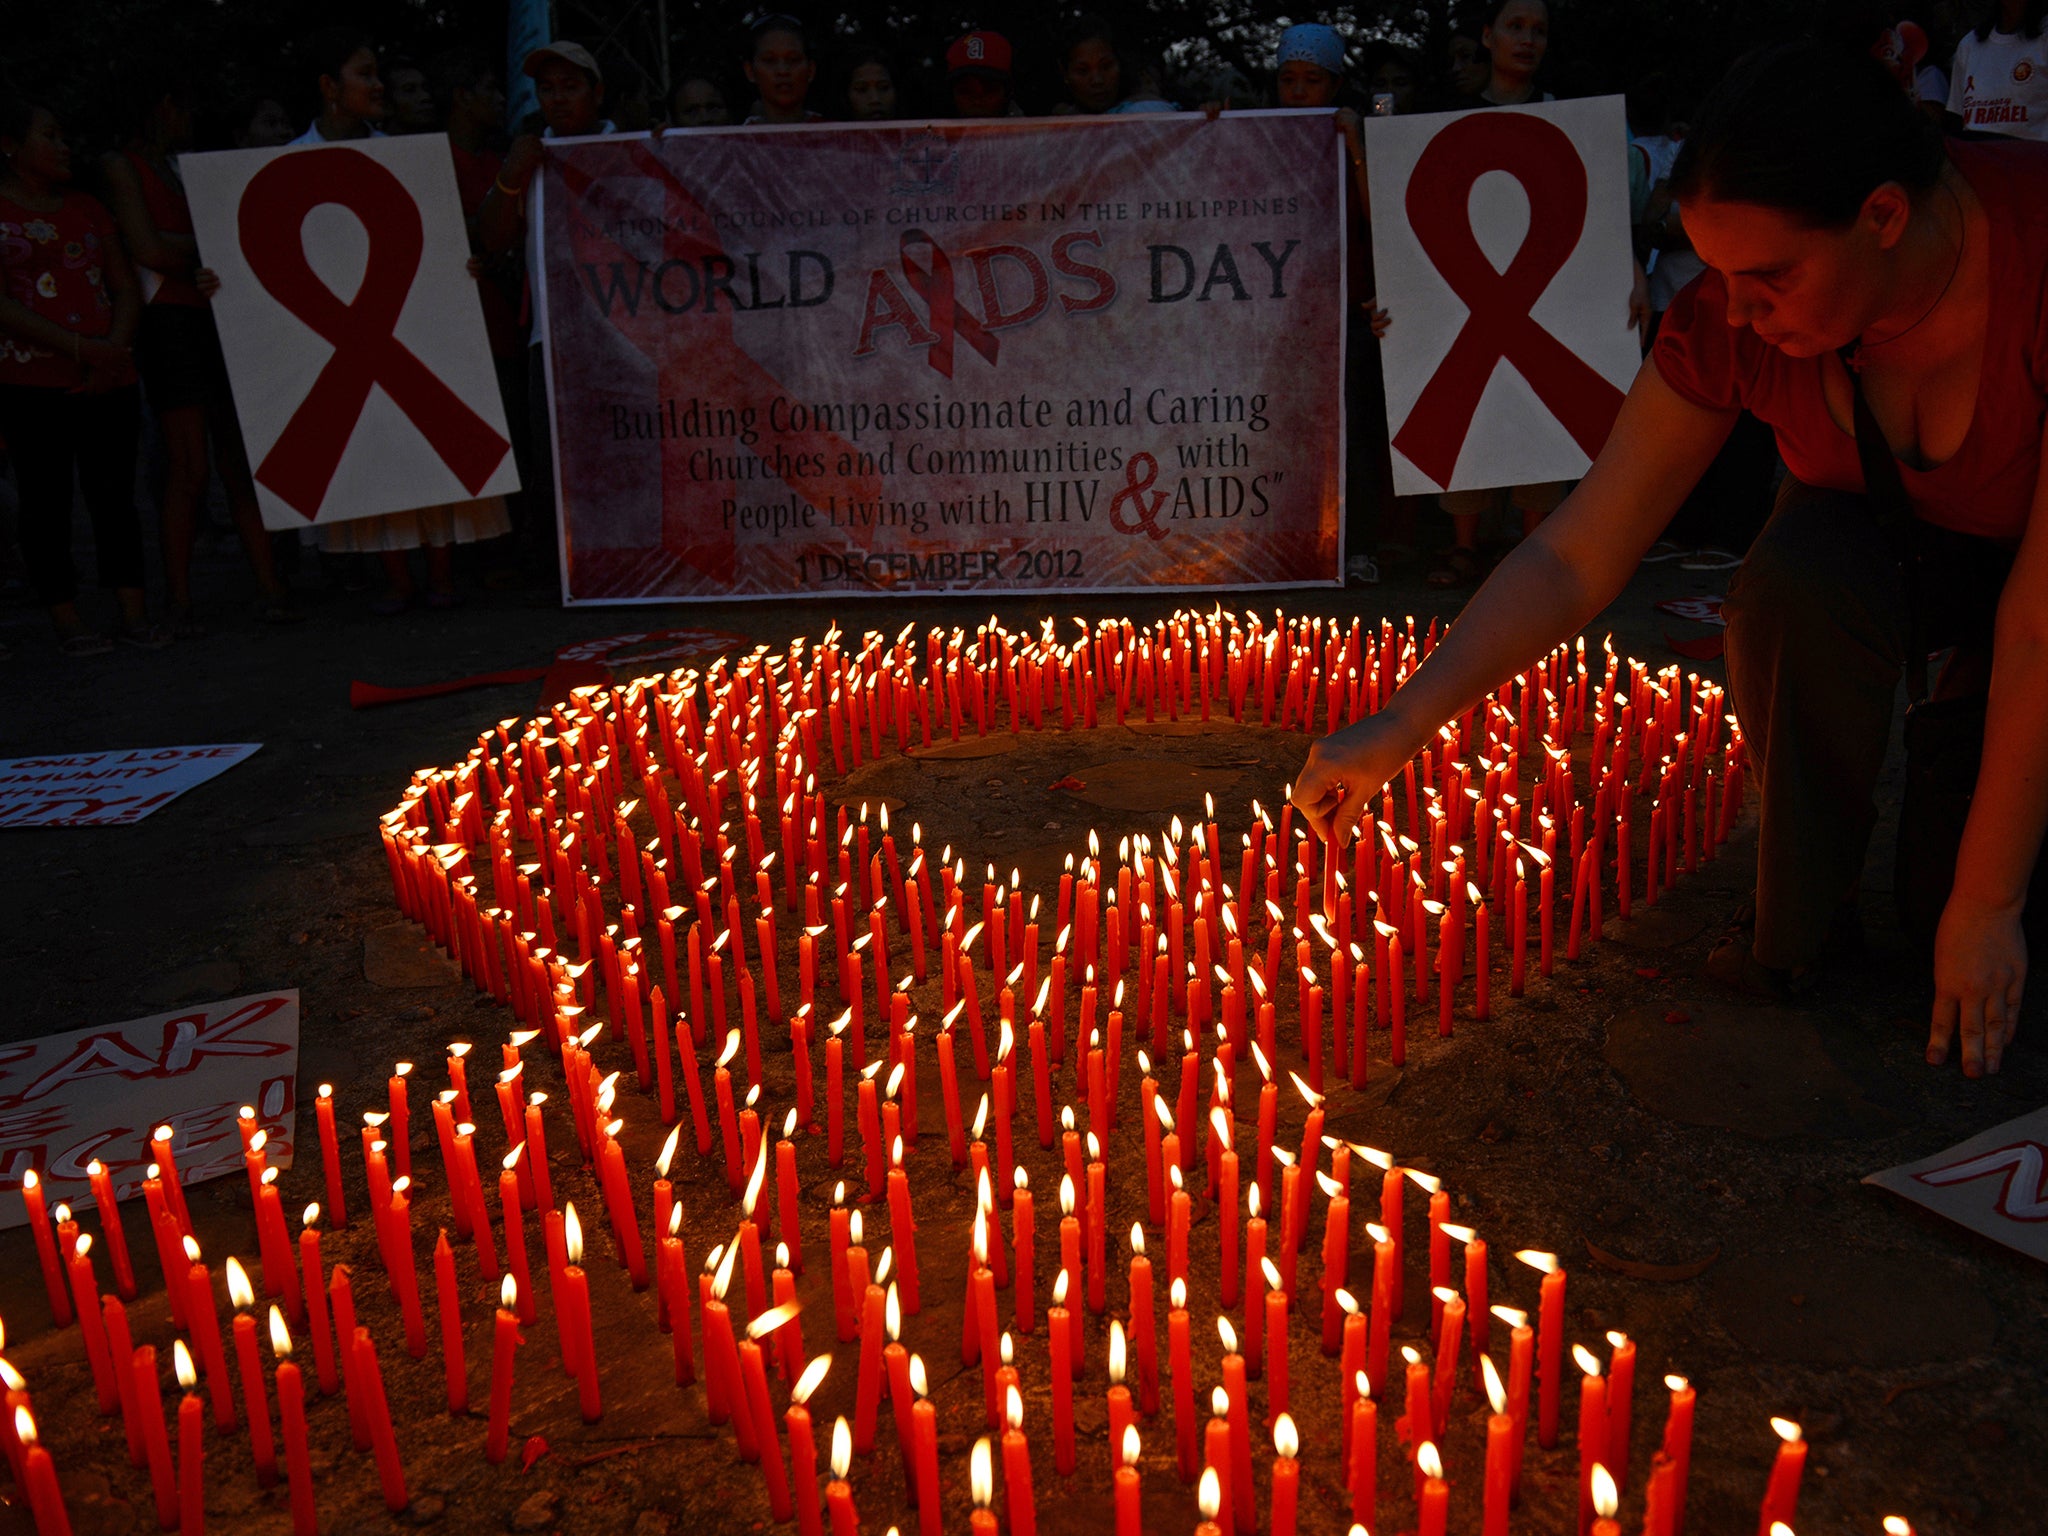 Blood tests on the infant in Milan suggested that HIV had been eradicated